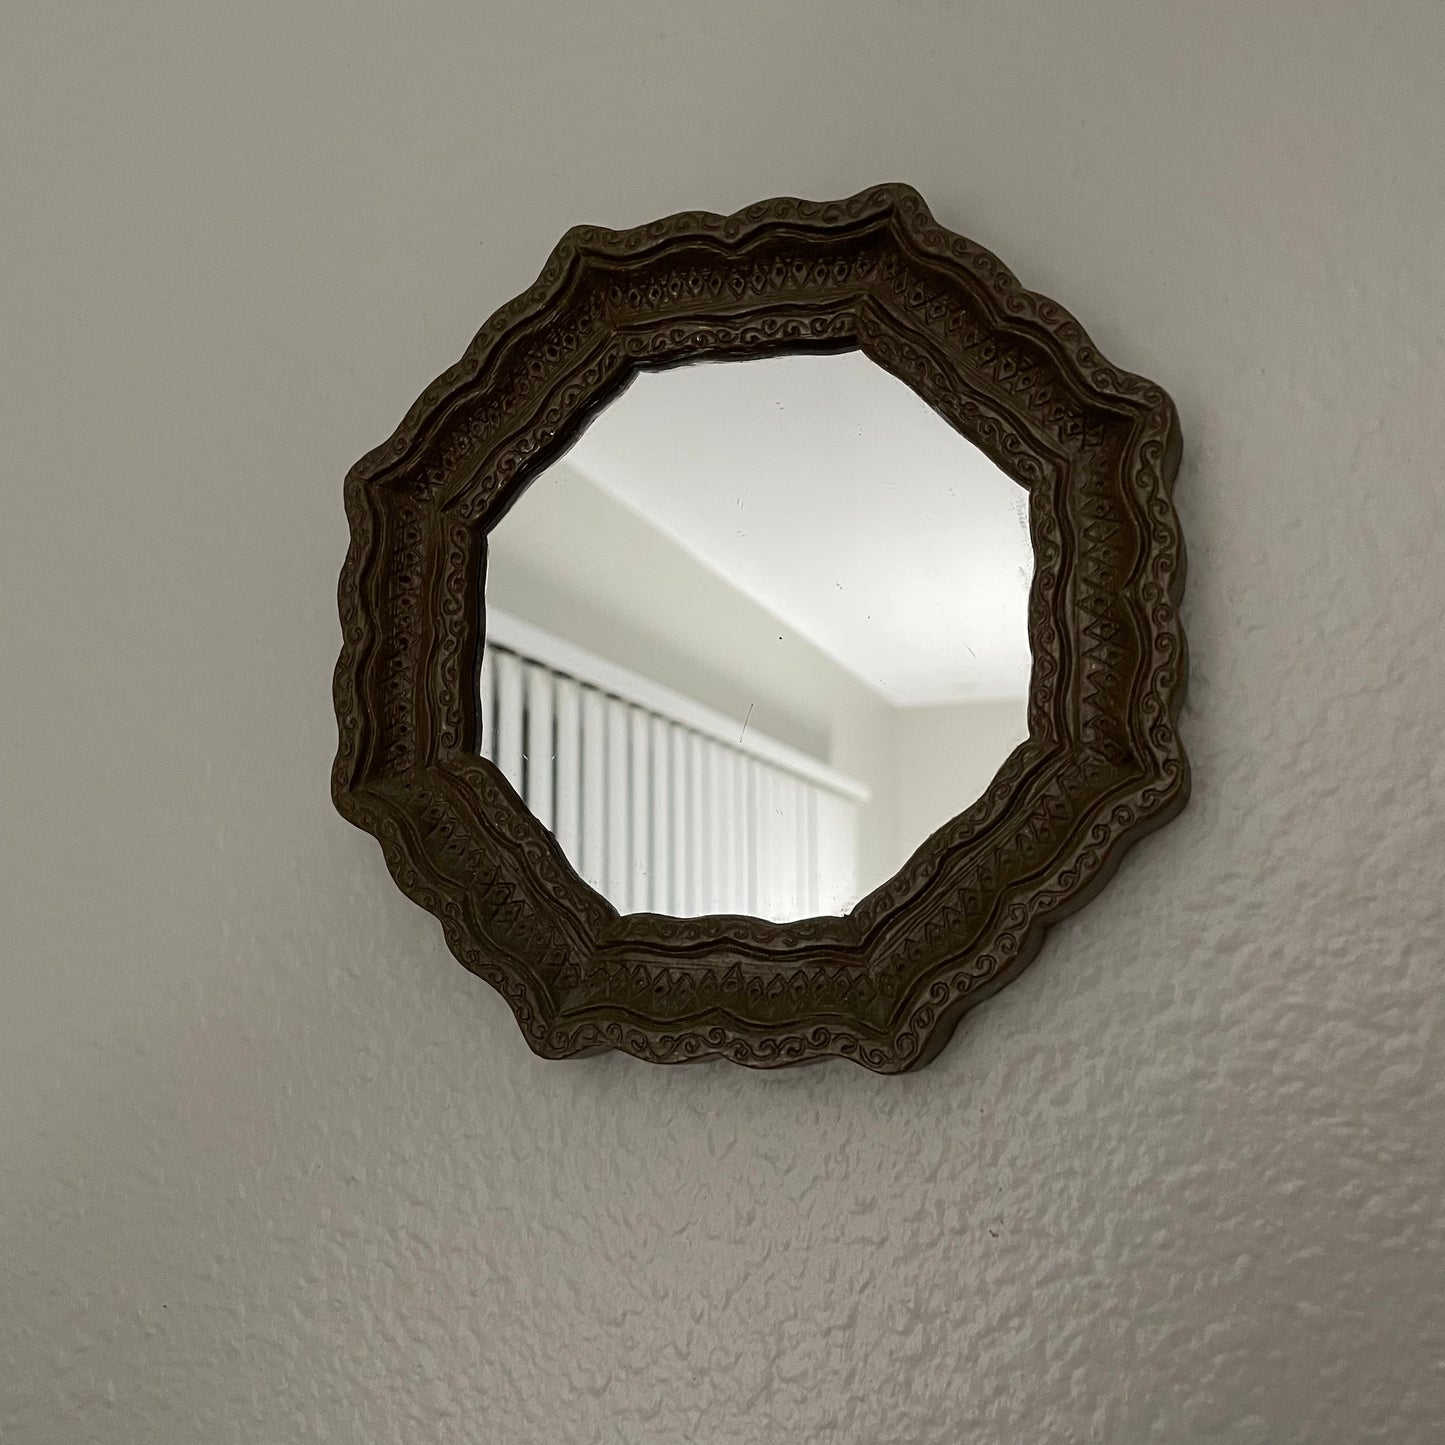 Set of Two (2) Vintage Wall Mirrors